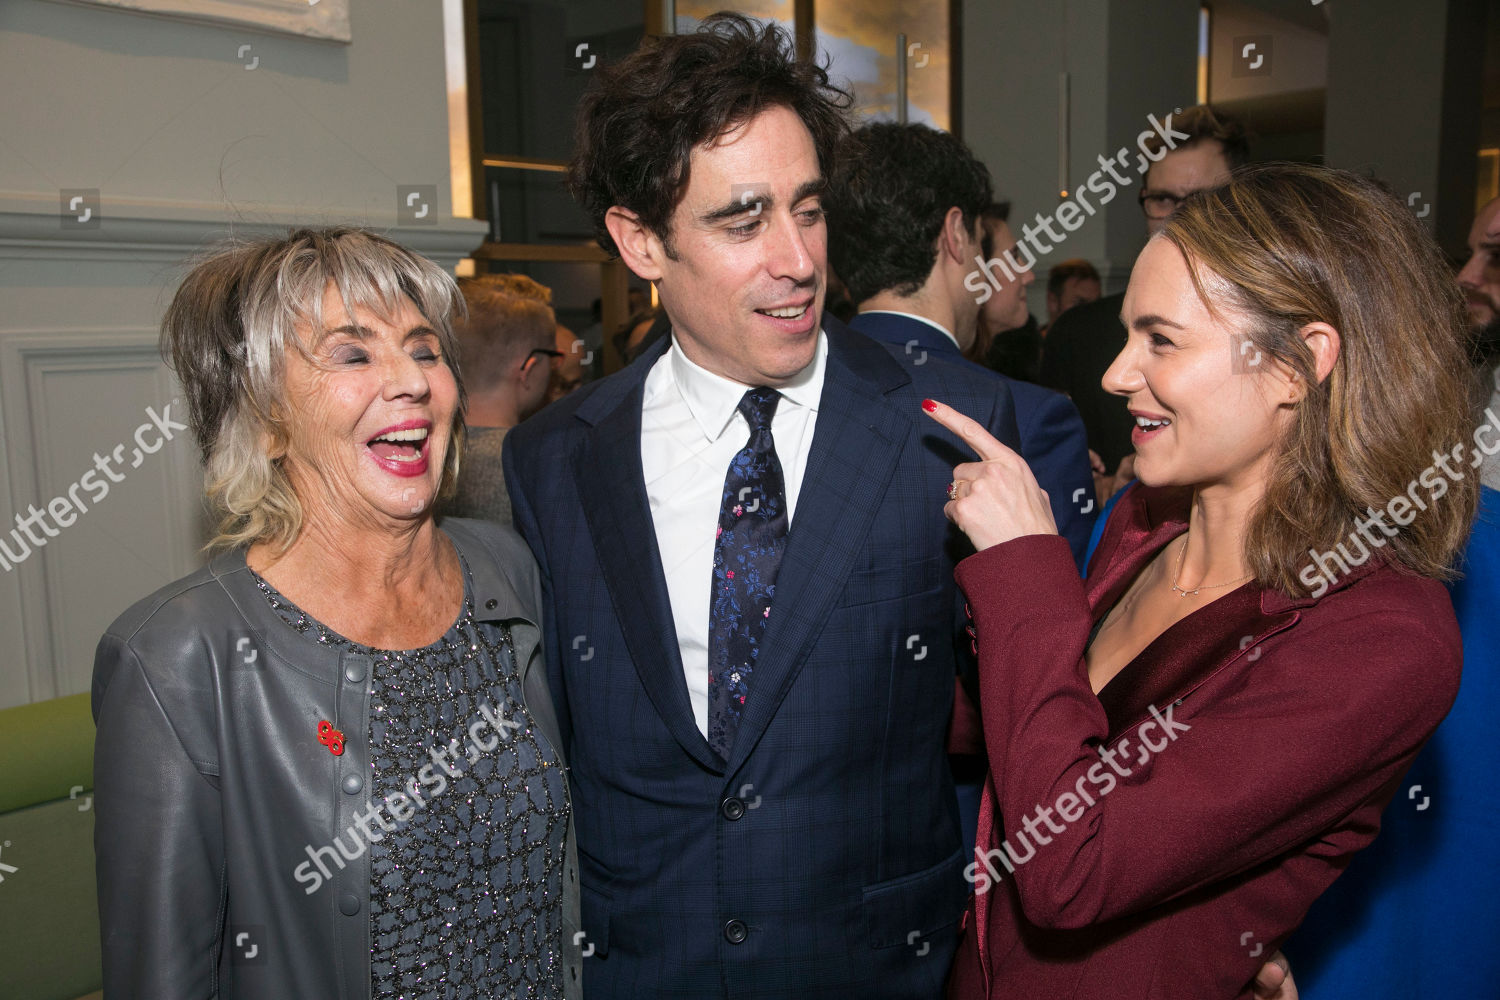 the-man-in-the-white-suit-party-press-night-london-uk-shutterstock-editorial-10439379q.jpg